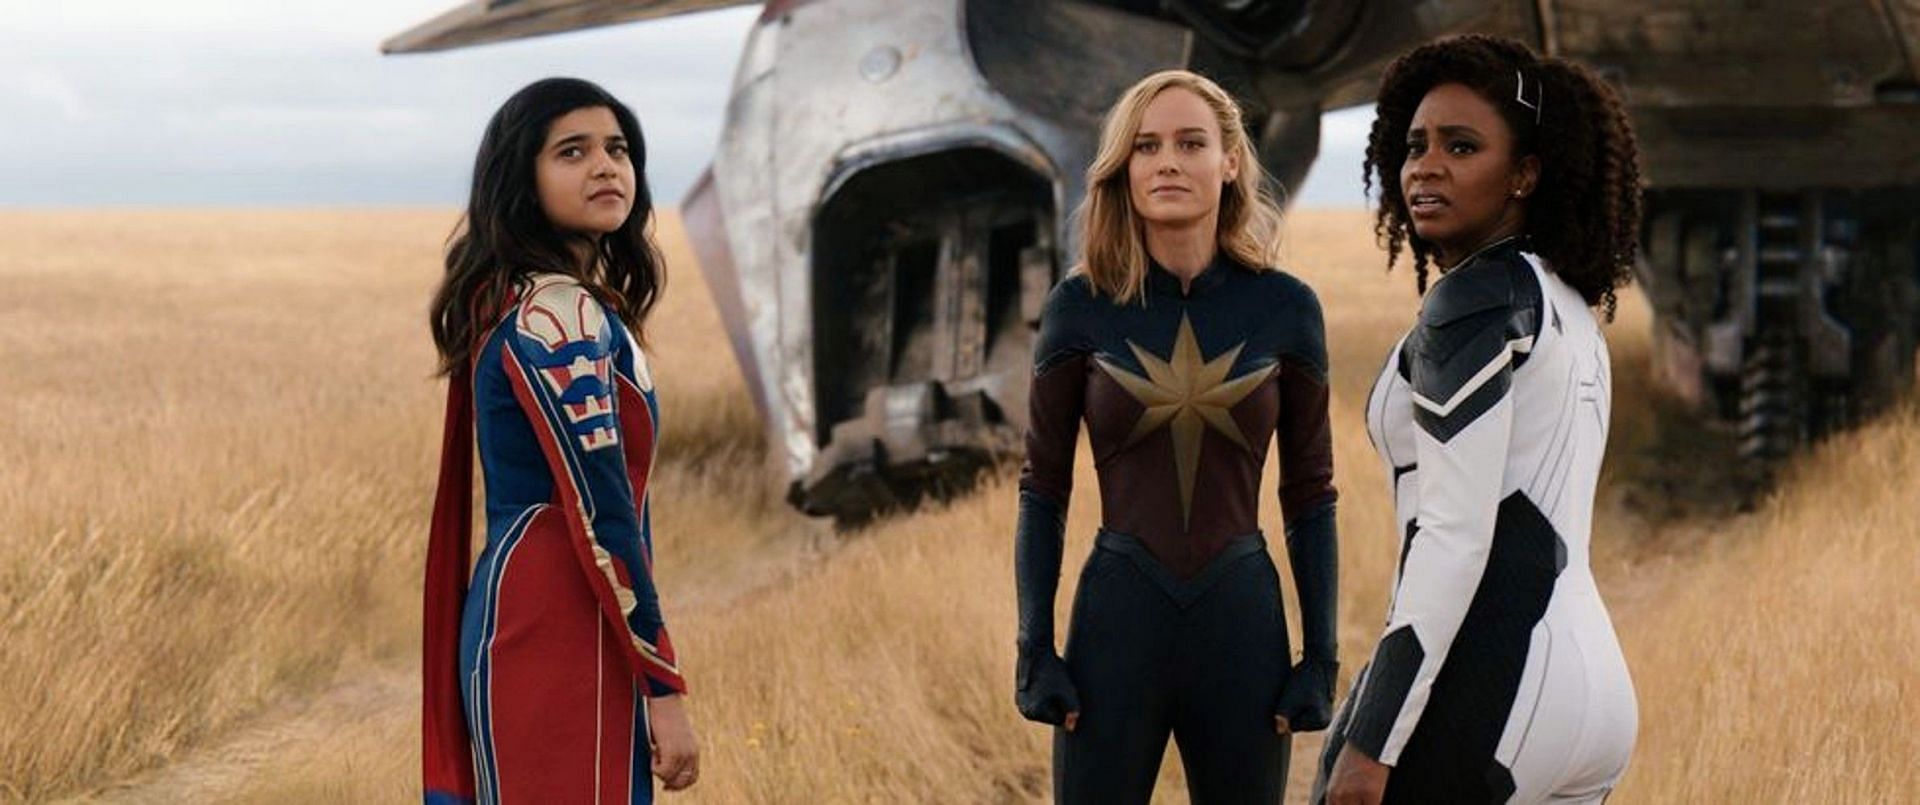 Iman Vellani, Brie Larson, and Teyonah Parris in a scene from The Marvels (Image via Marvel Studios)